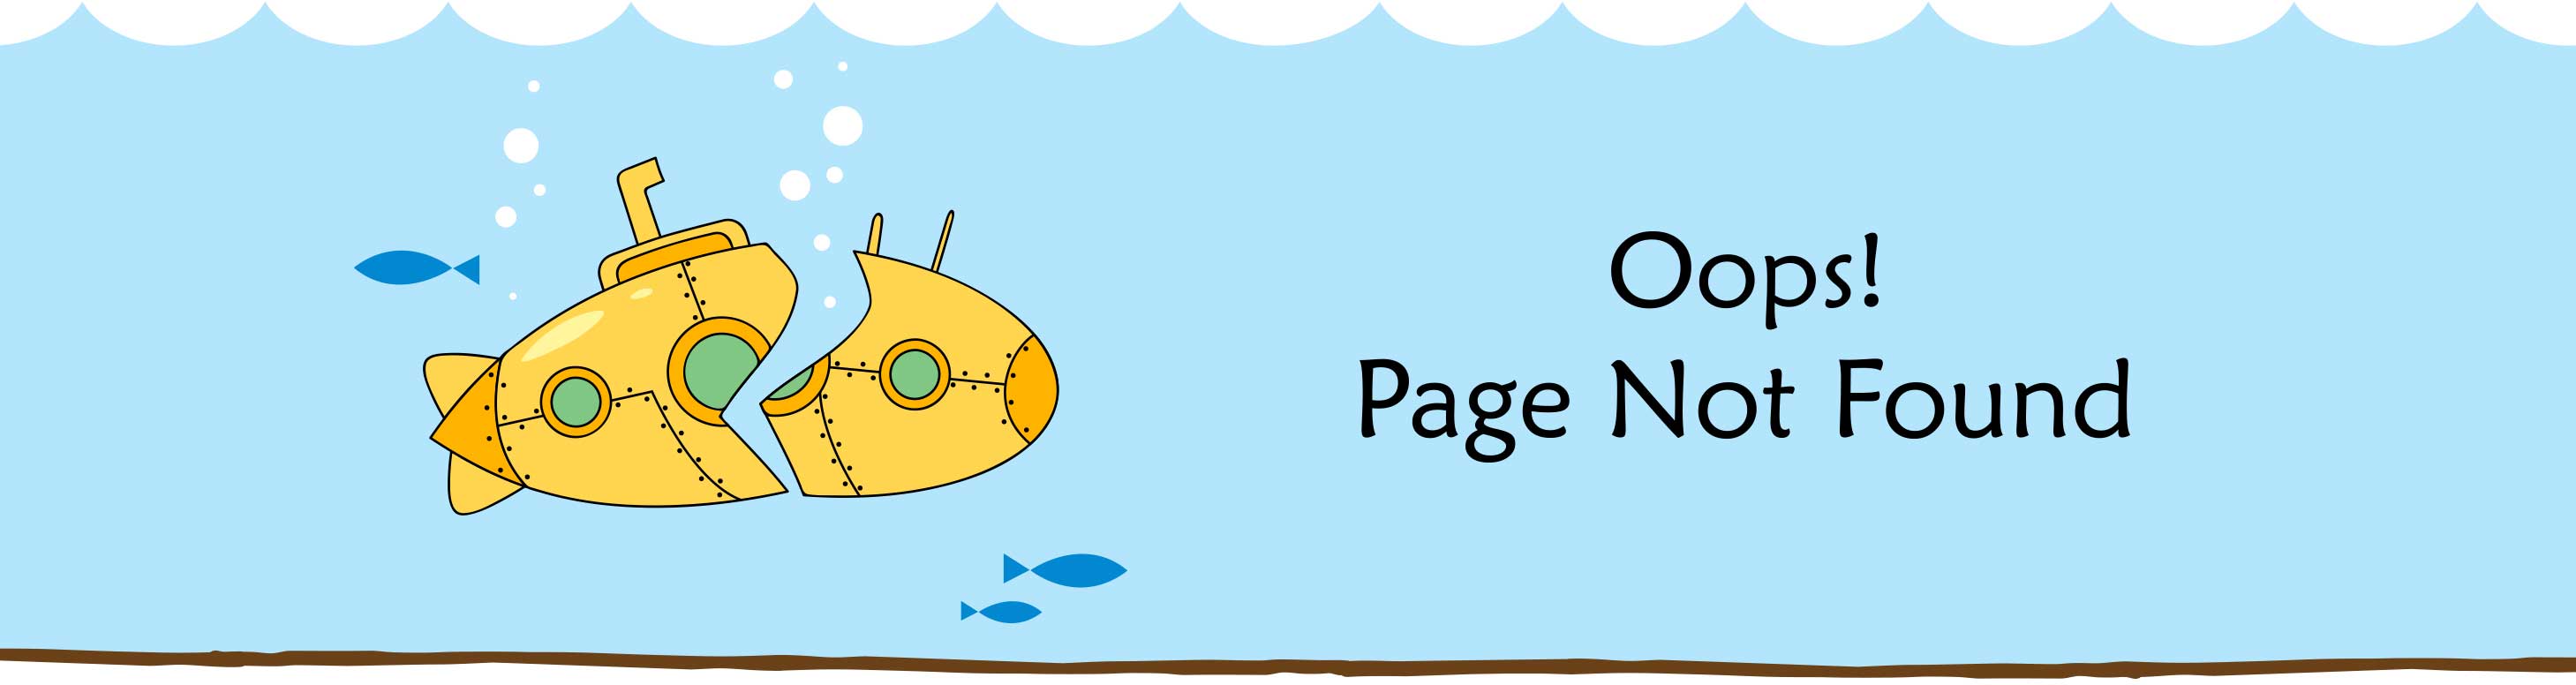 Oops! Page Not Found